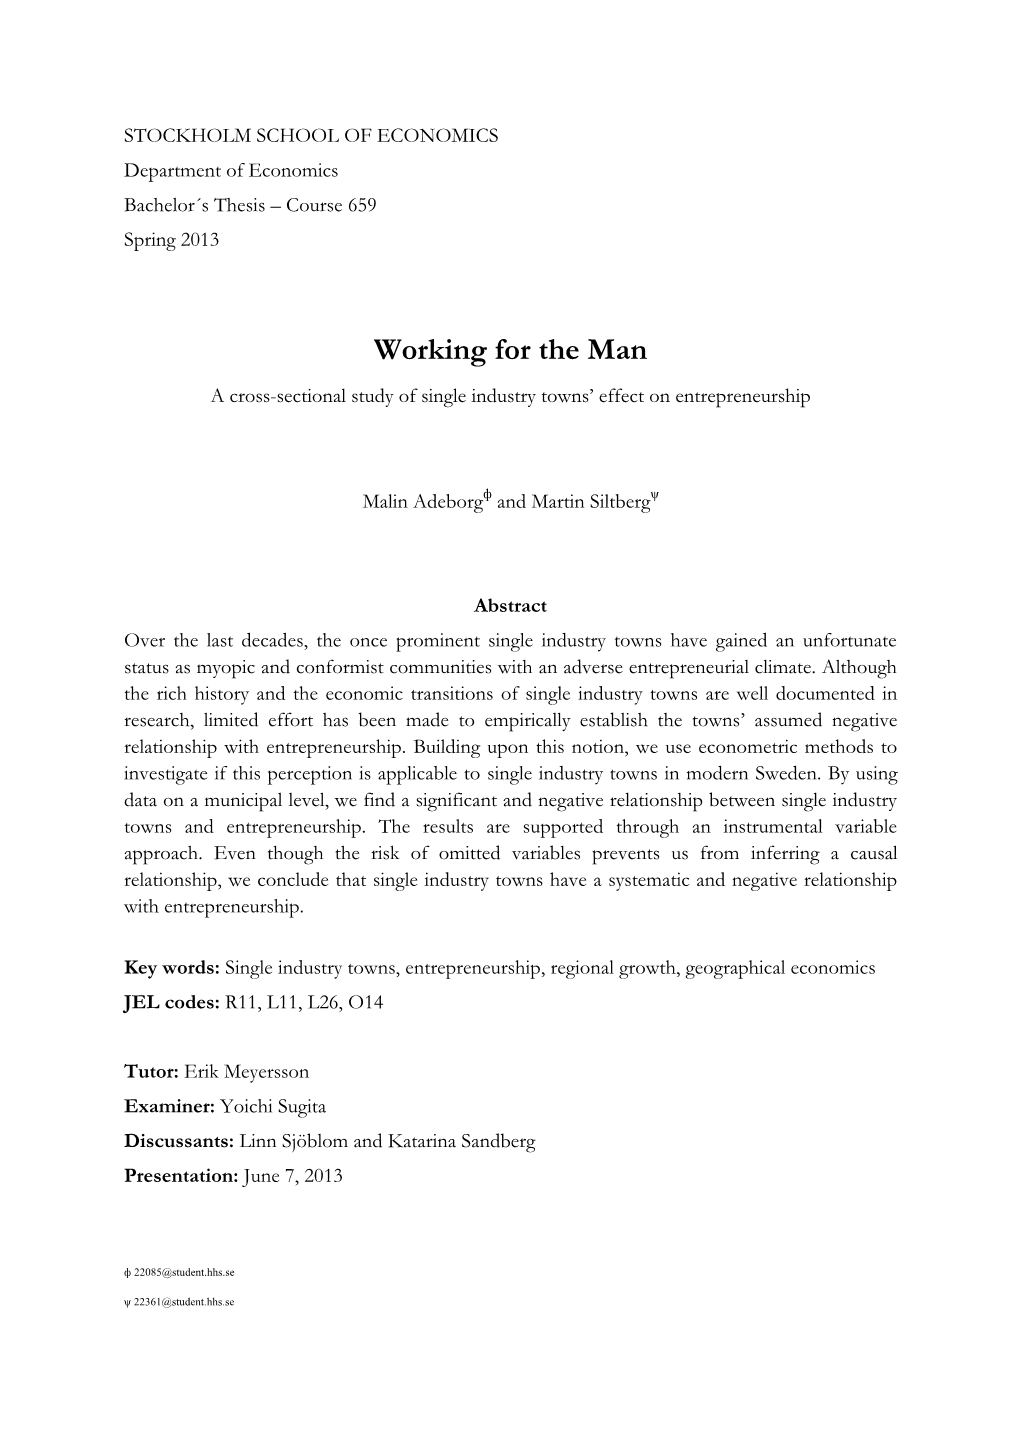 Working for the Man a Cross-Sectional Study of Single Industry Towns’ Effect on Entrepreneurship